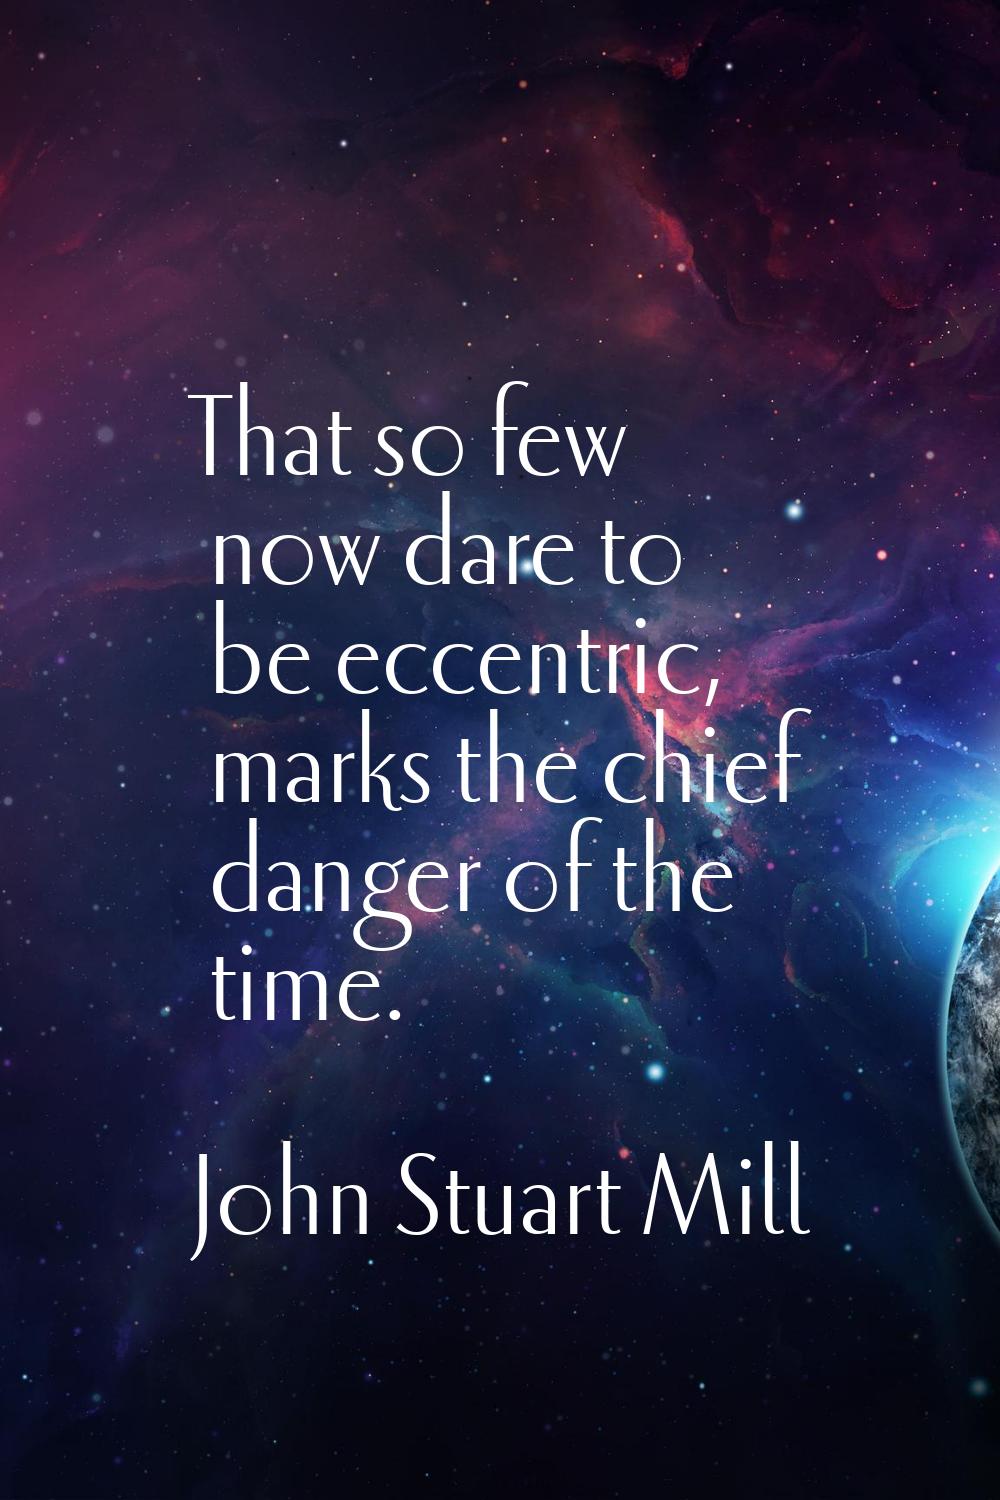 That so few now dare to be eccentric, marks the chief danger of the time.